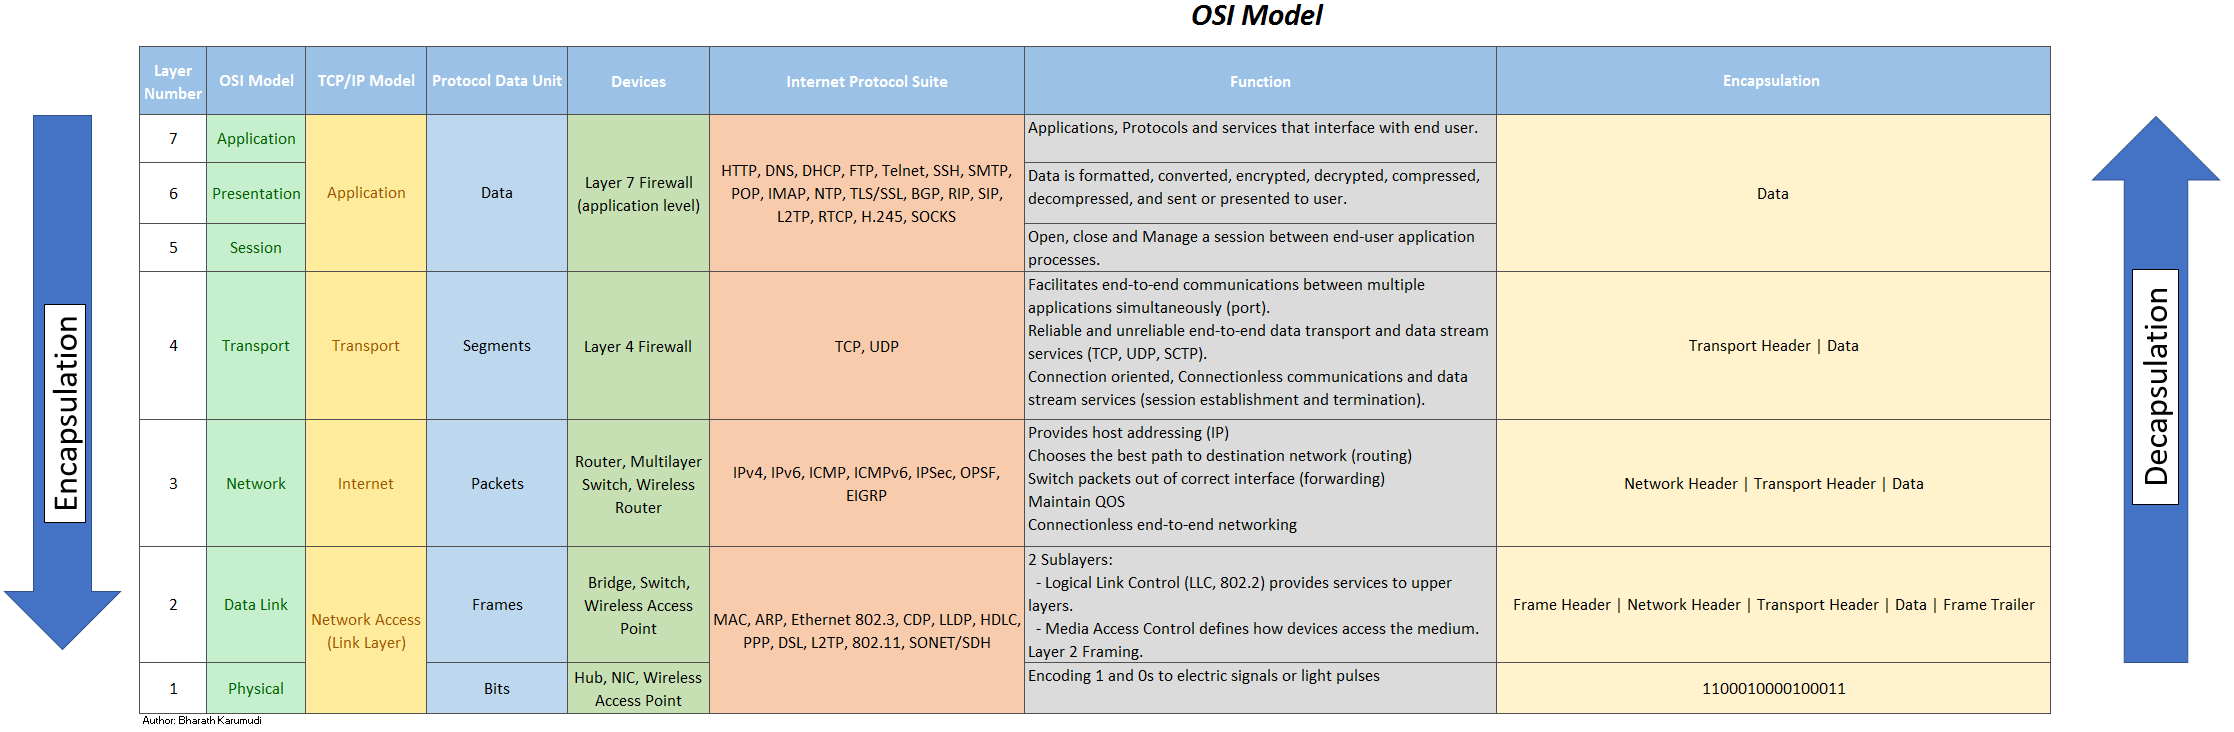 OSI Reference model and comparison